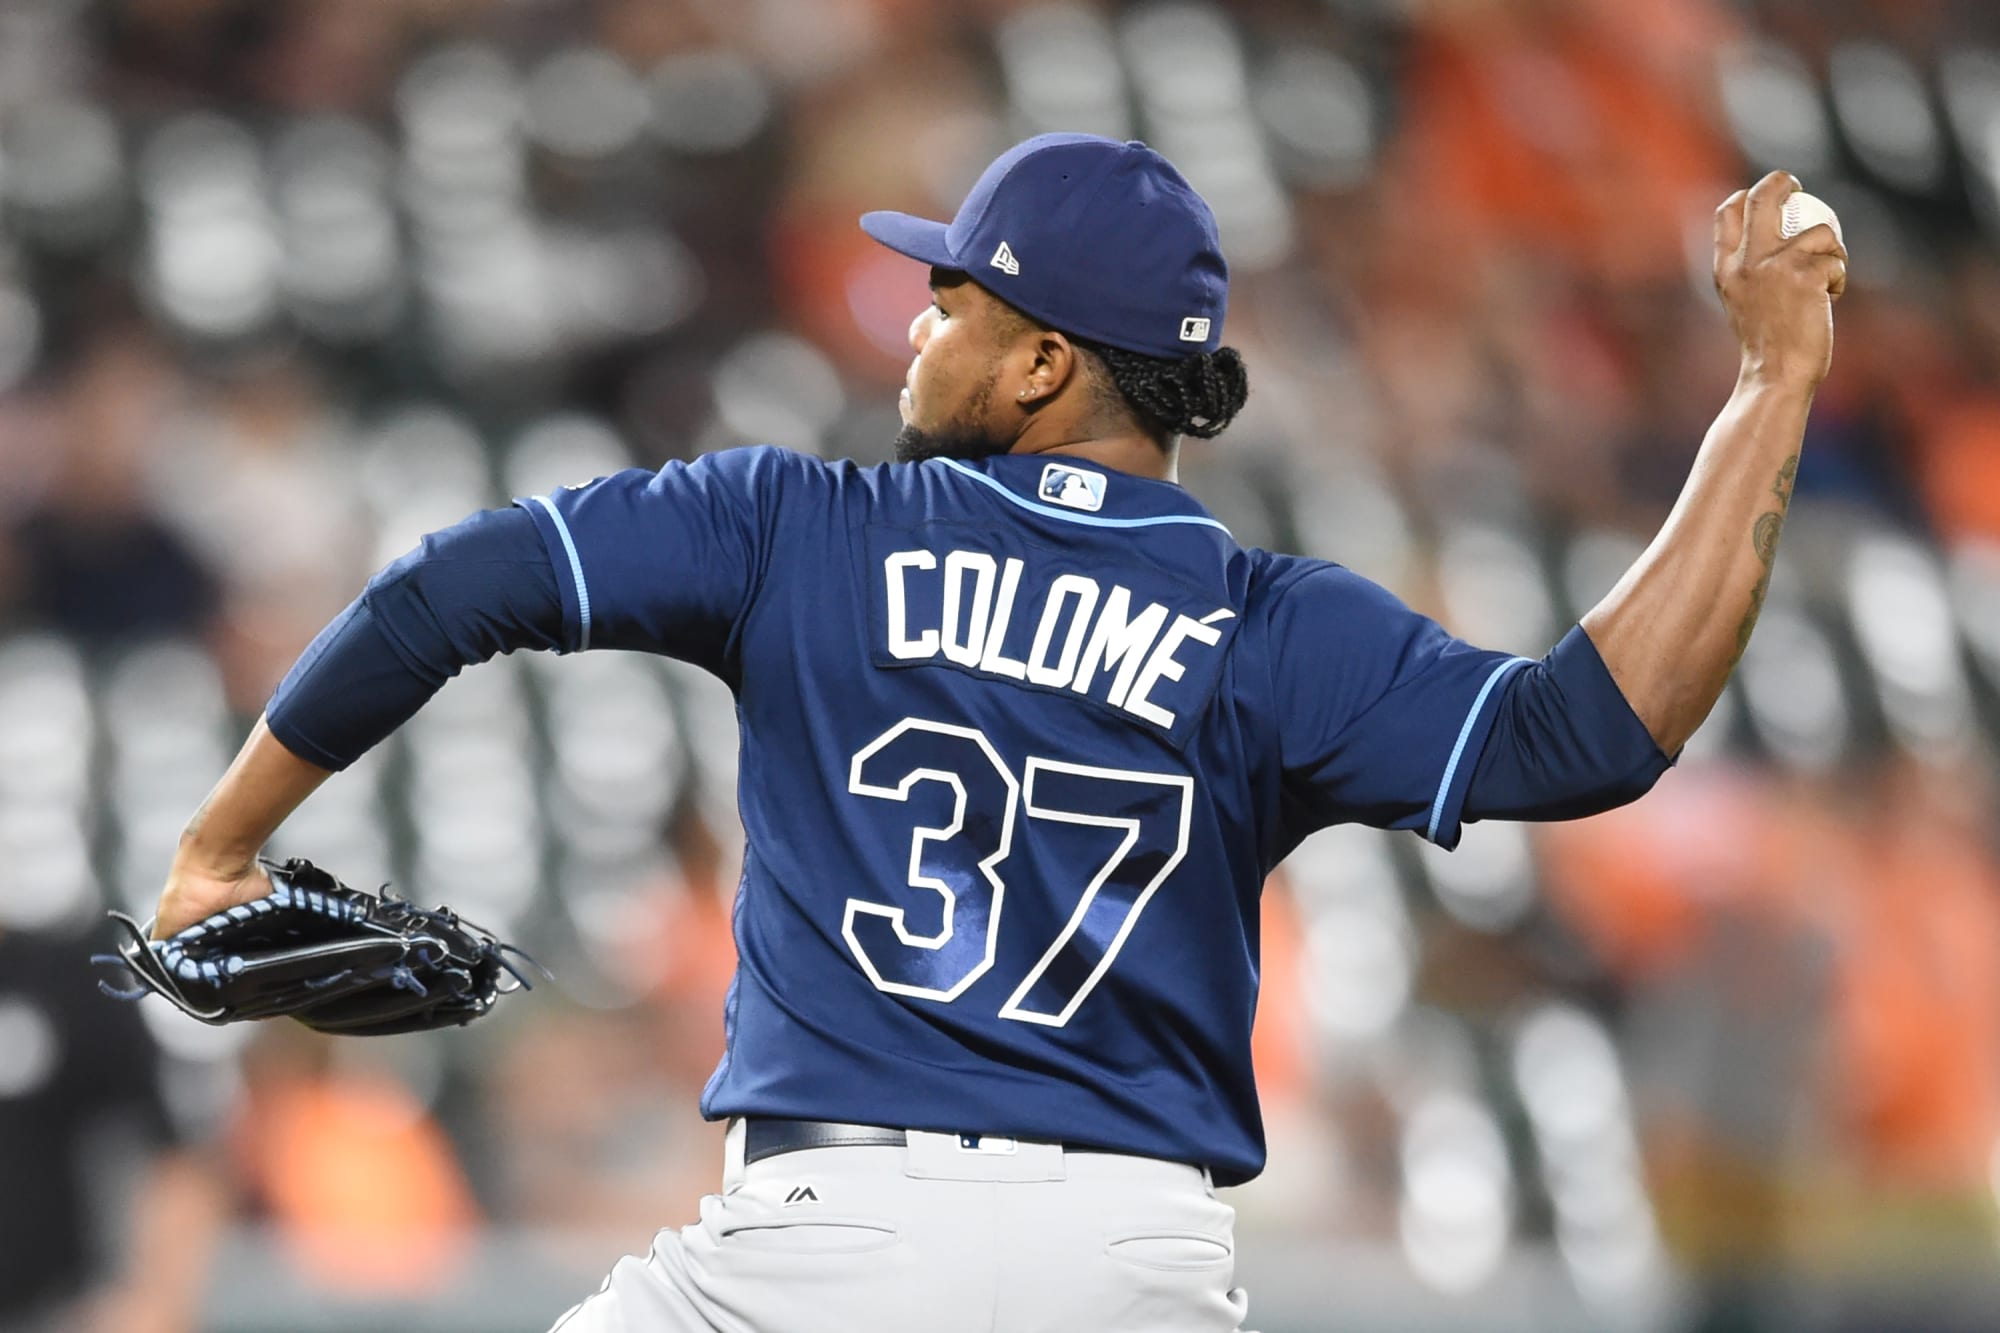 St. Louis Cardinals: Rays and Cards discussing Alex Colome